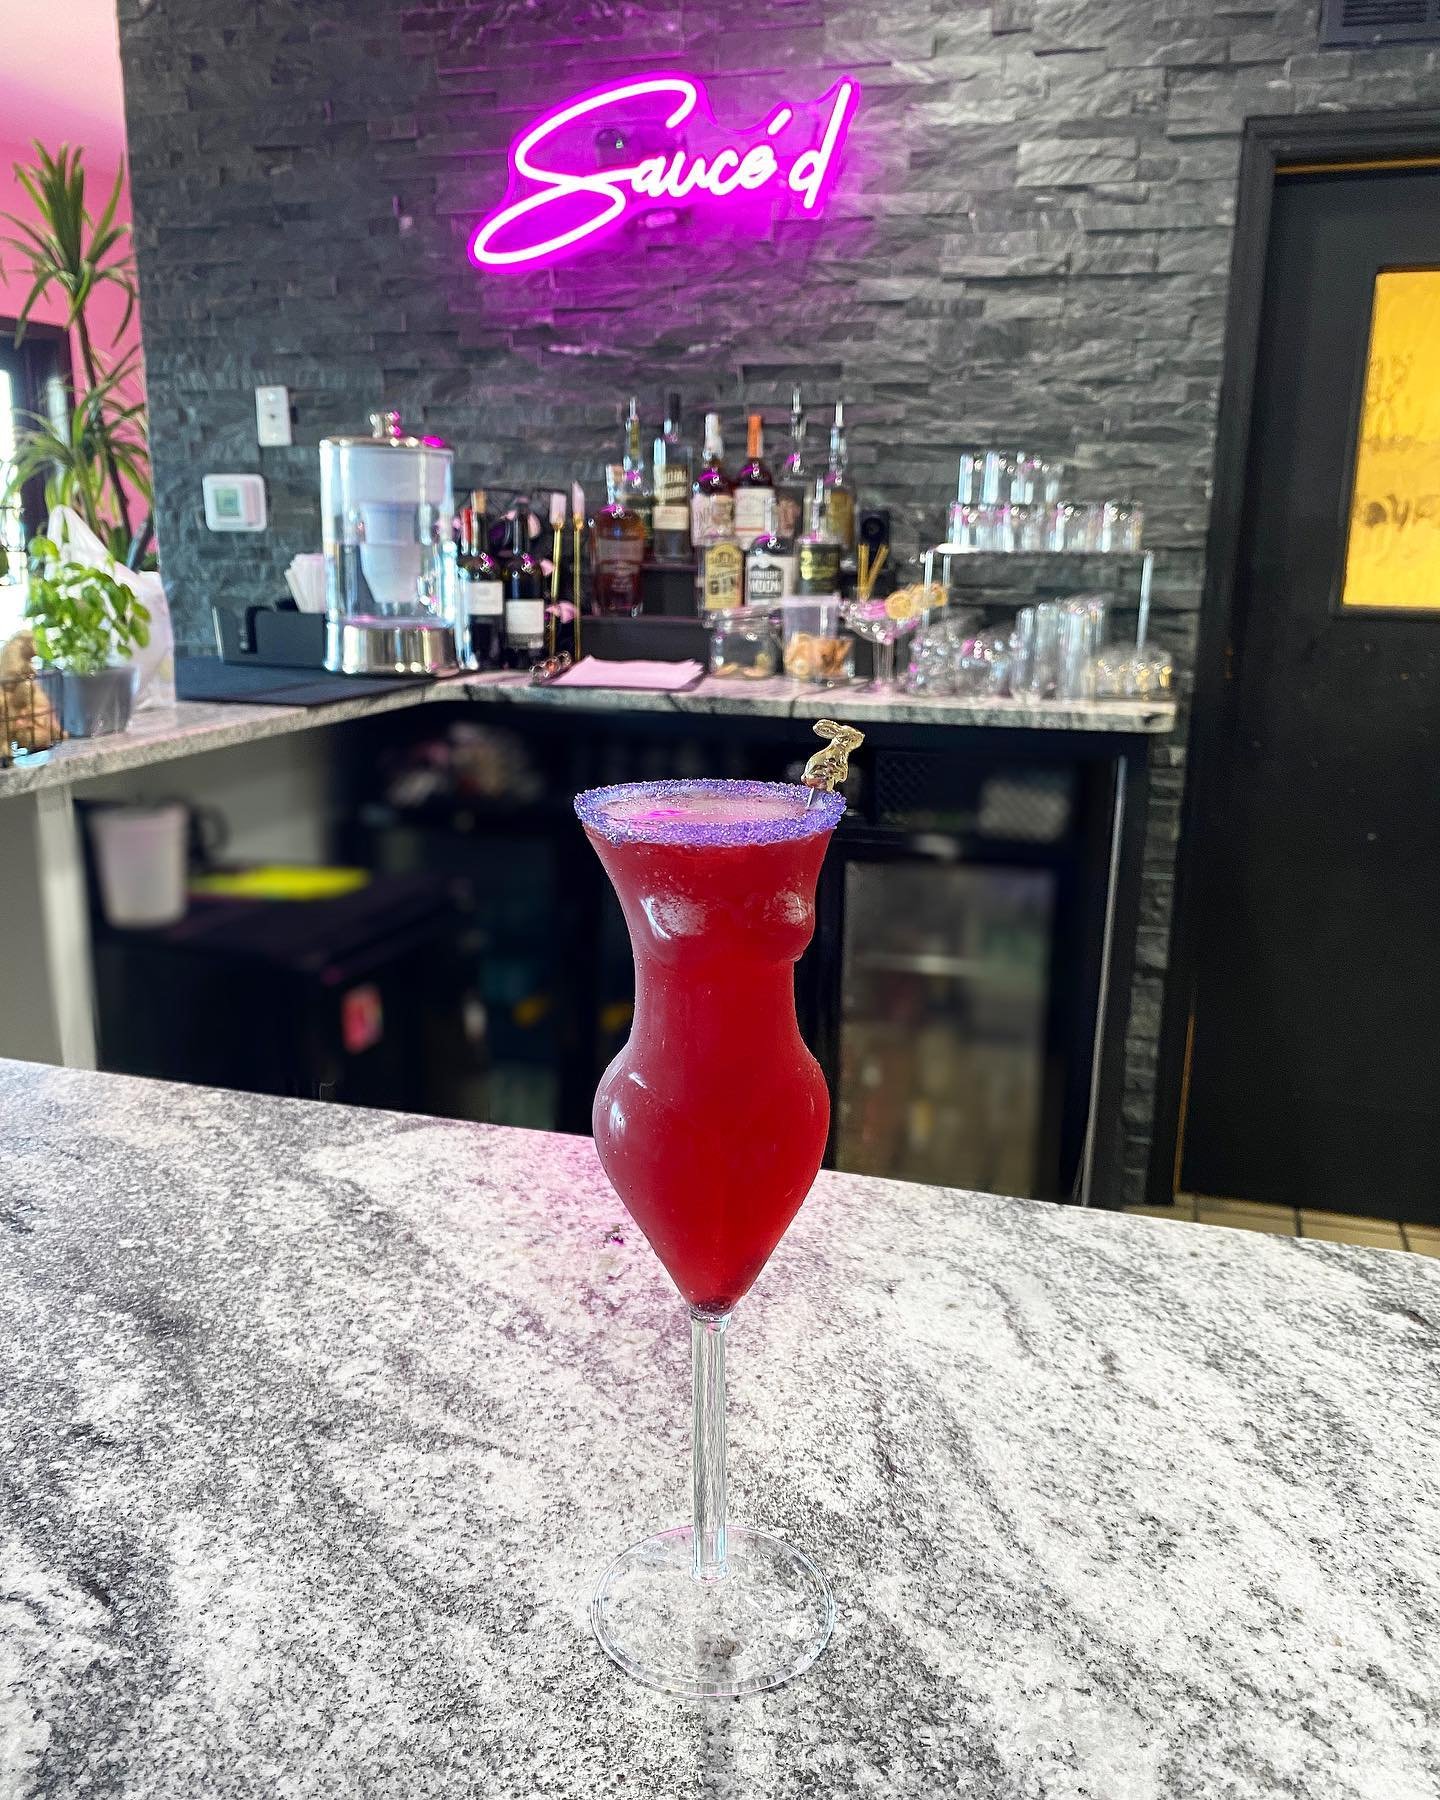 If you&rsquo;re in the Wilmington, NC area this weekend, don&rsquo;t miss &ldquo;Jessica Rabbit&rdquo; at @saucedilm! This iconic character in cocktail form will only be available this weekend (2/11-2/14) in celebration of Valentine&rsquo;s Day! &hea